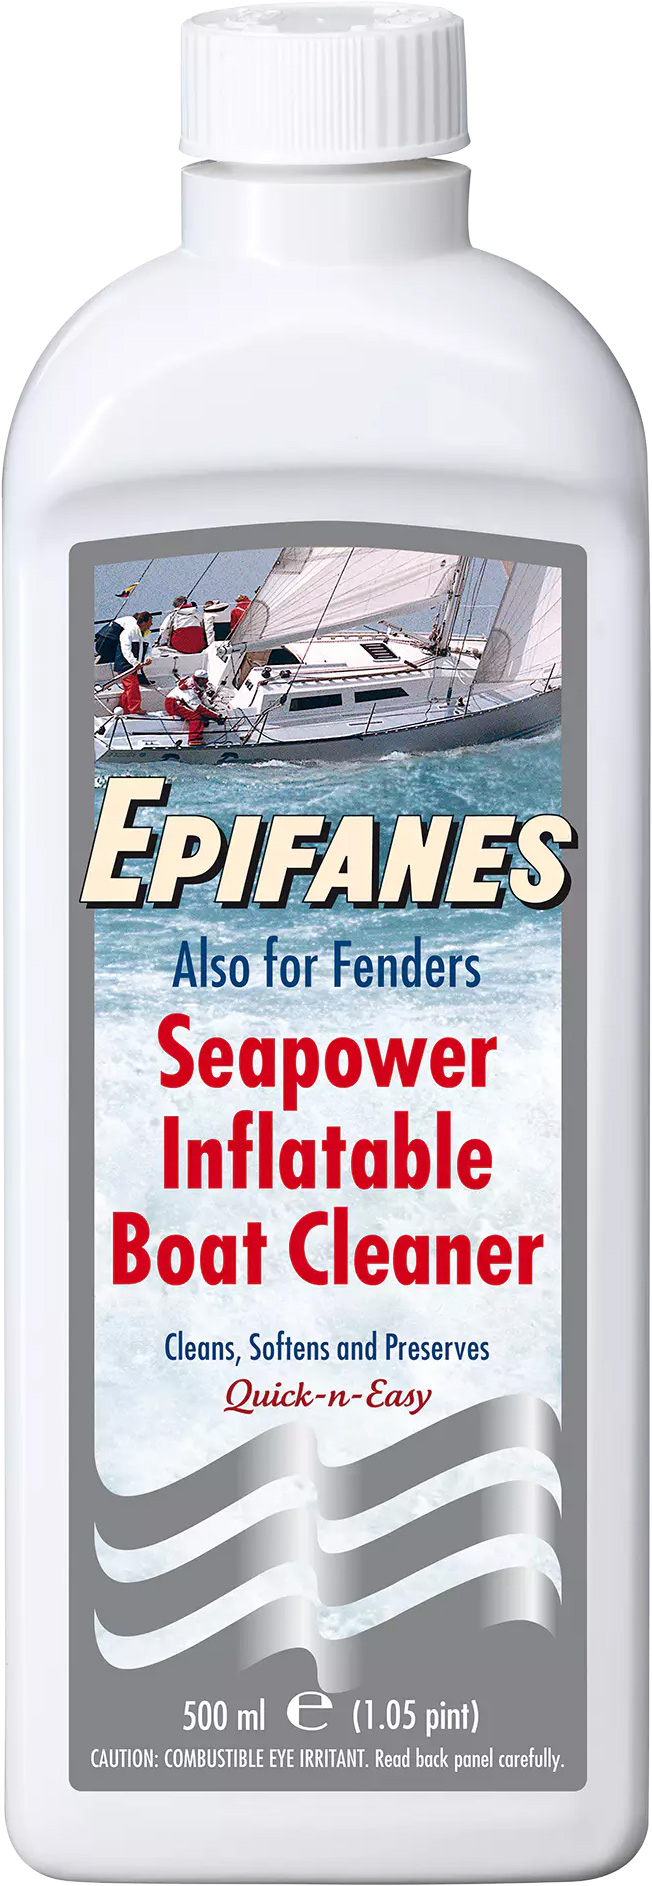 Epifanes Seapower Inflatable Boat Cleaner 500 ml